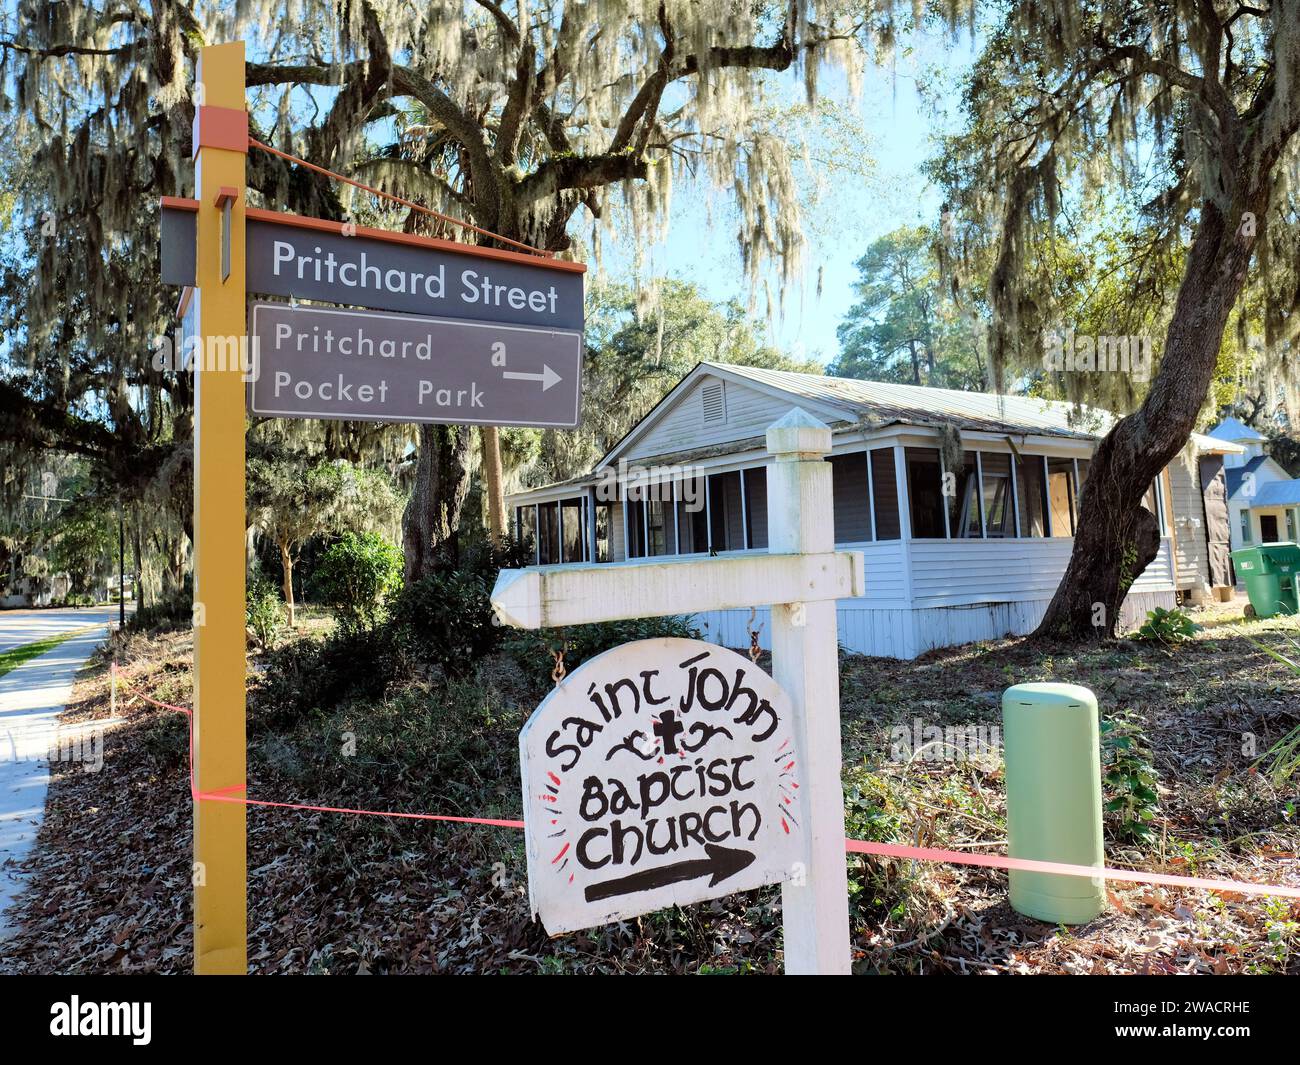 Pritchard Street and Pritchard Pocket Park signs with a hand painted sign pointing towards Saint John Baptist Church in Bluffton, South Carolina. Stock Photo